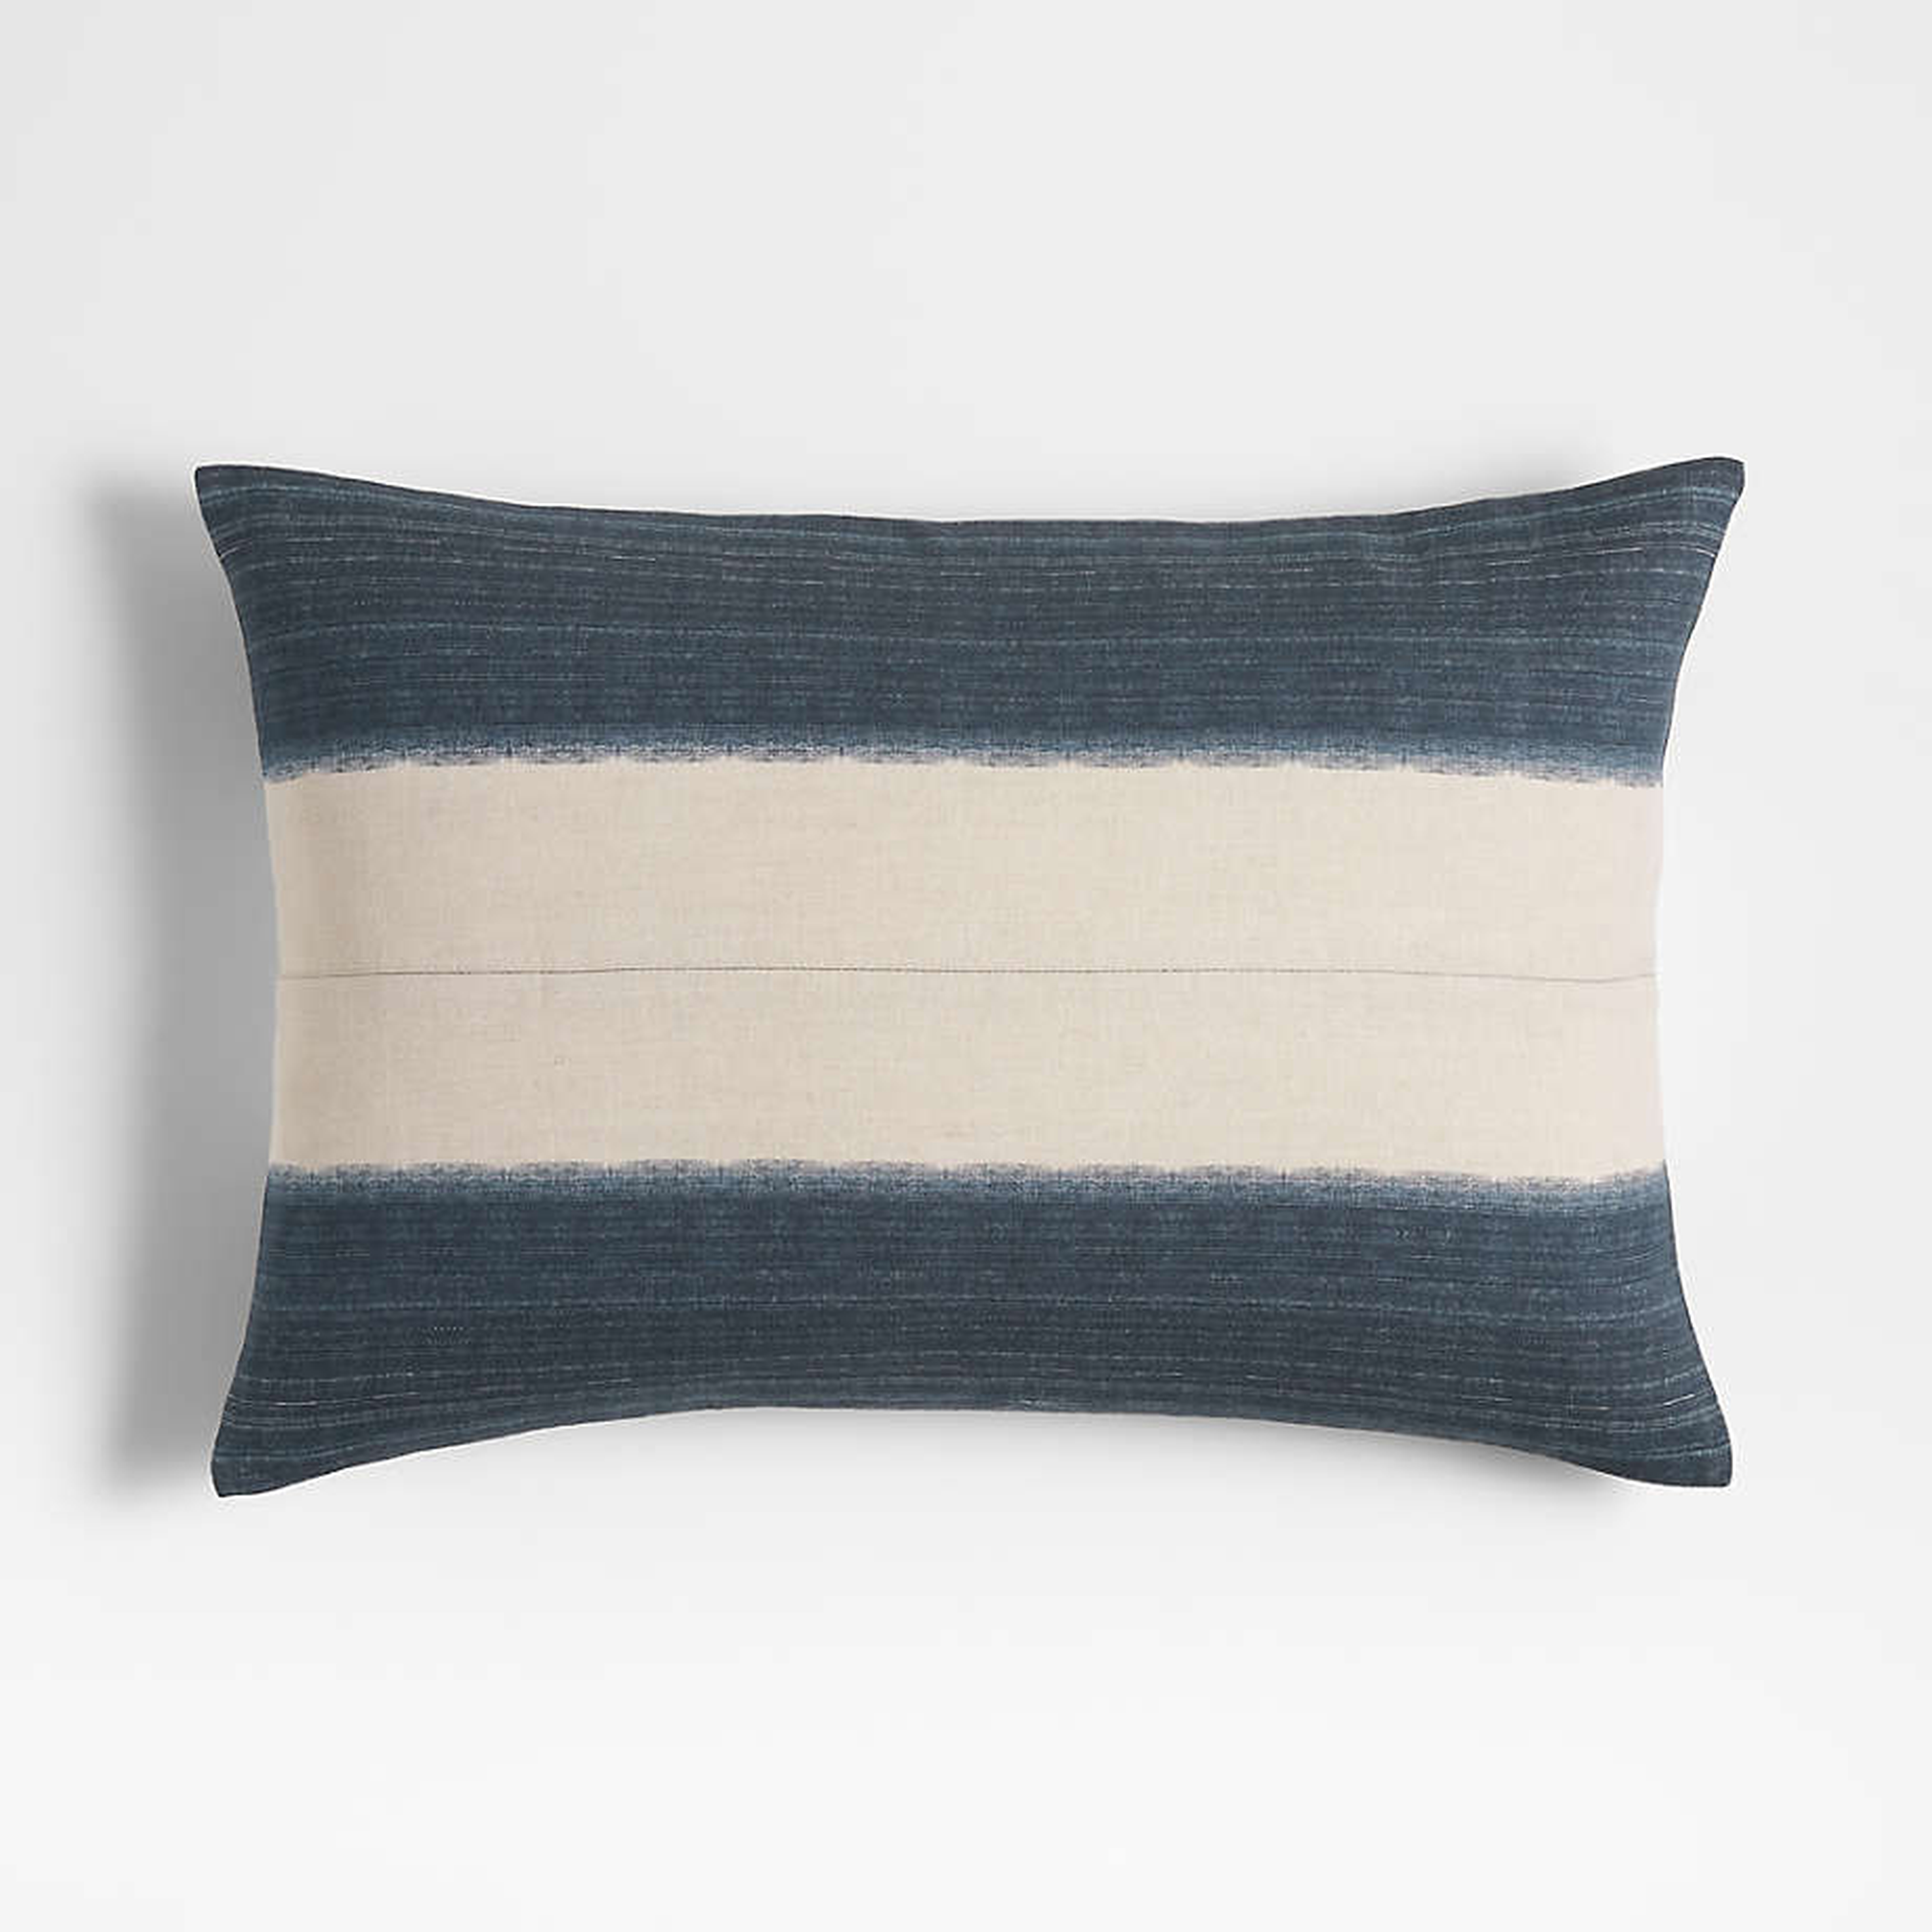 Littoral 22"x15" Two-Tone Navy Throw Pillow Cover - Crate and Barrel